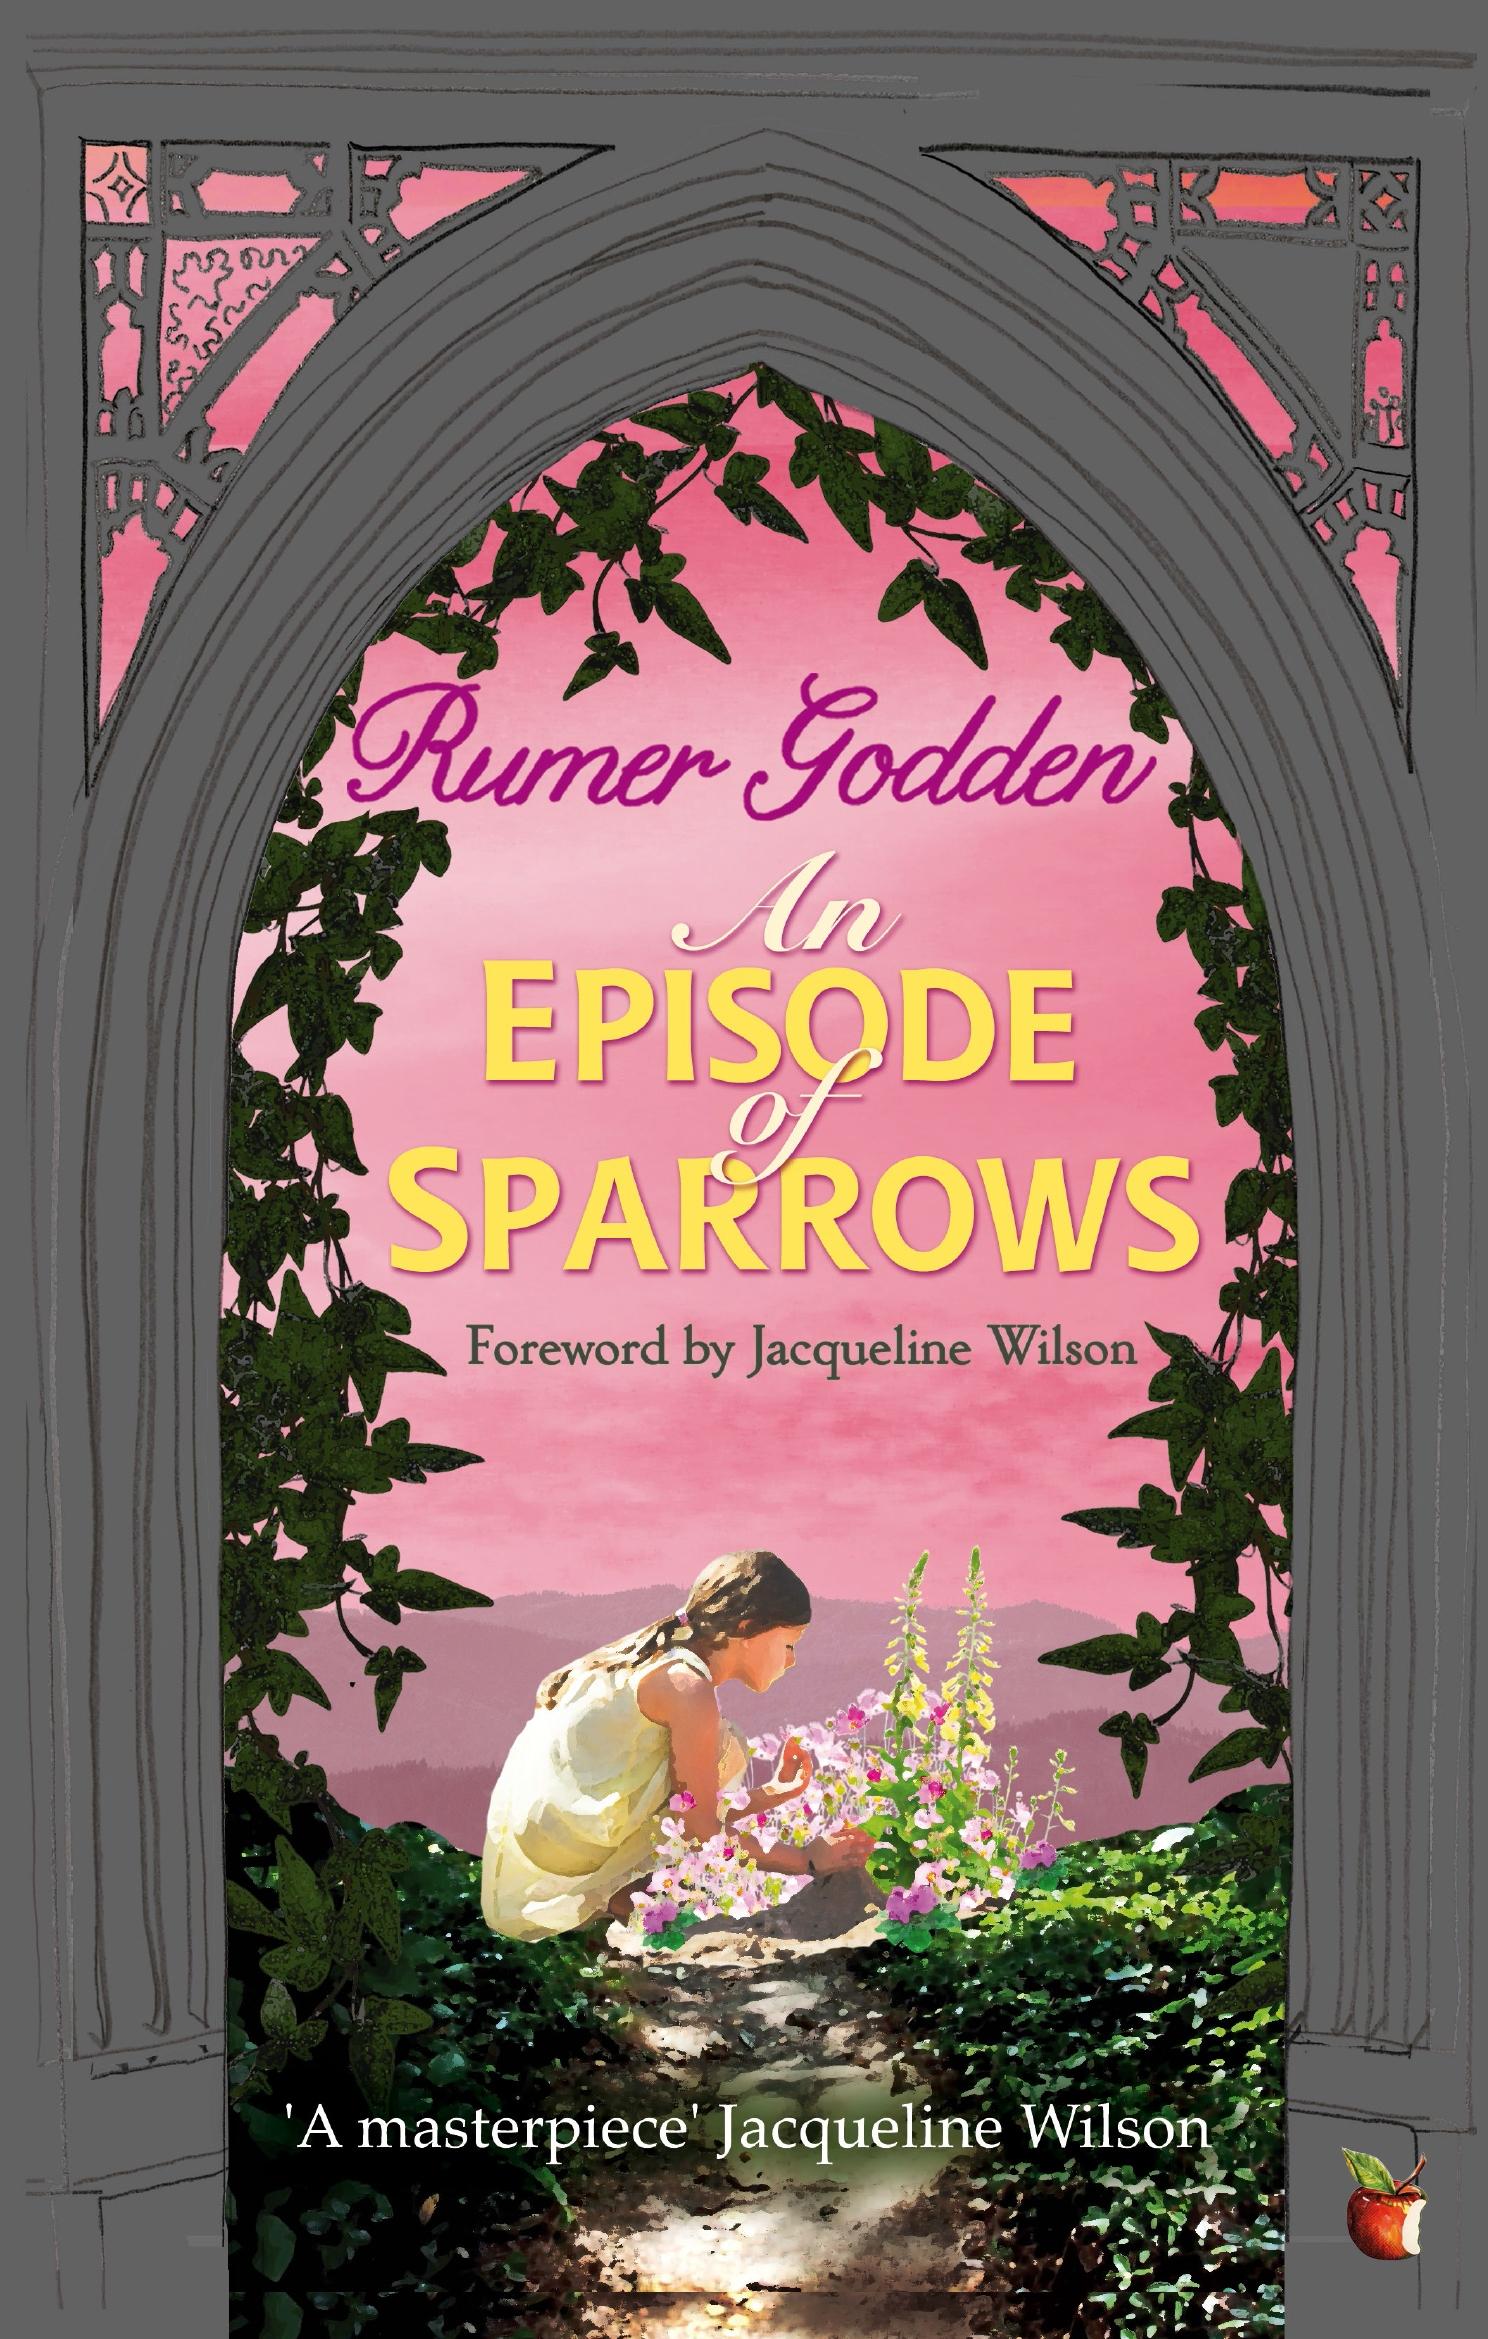 Book cover from An Episode of Sparrows